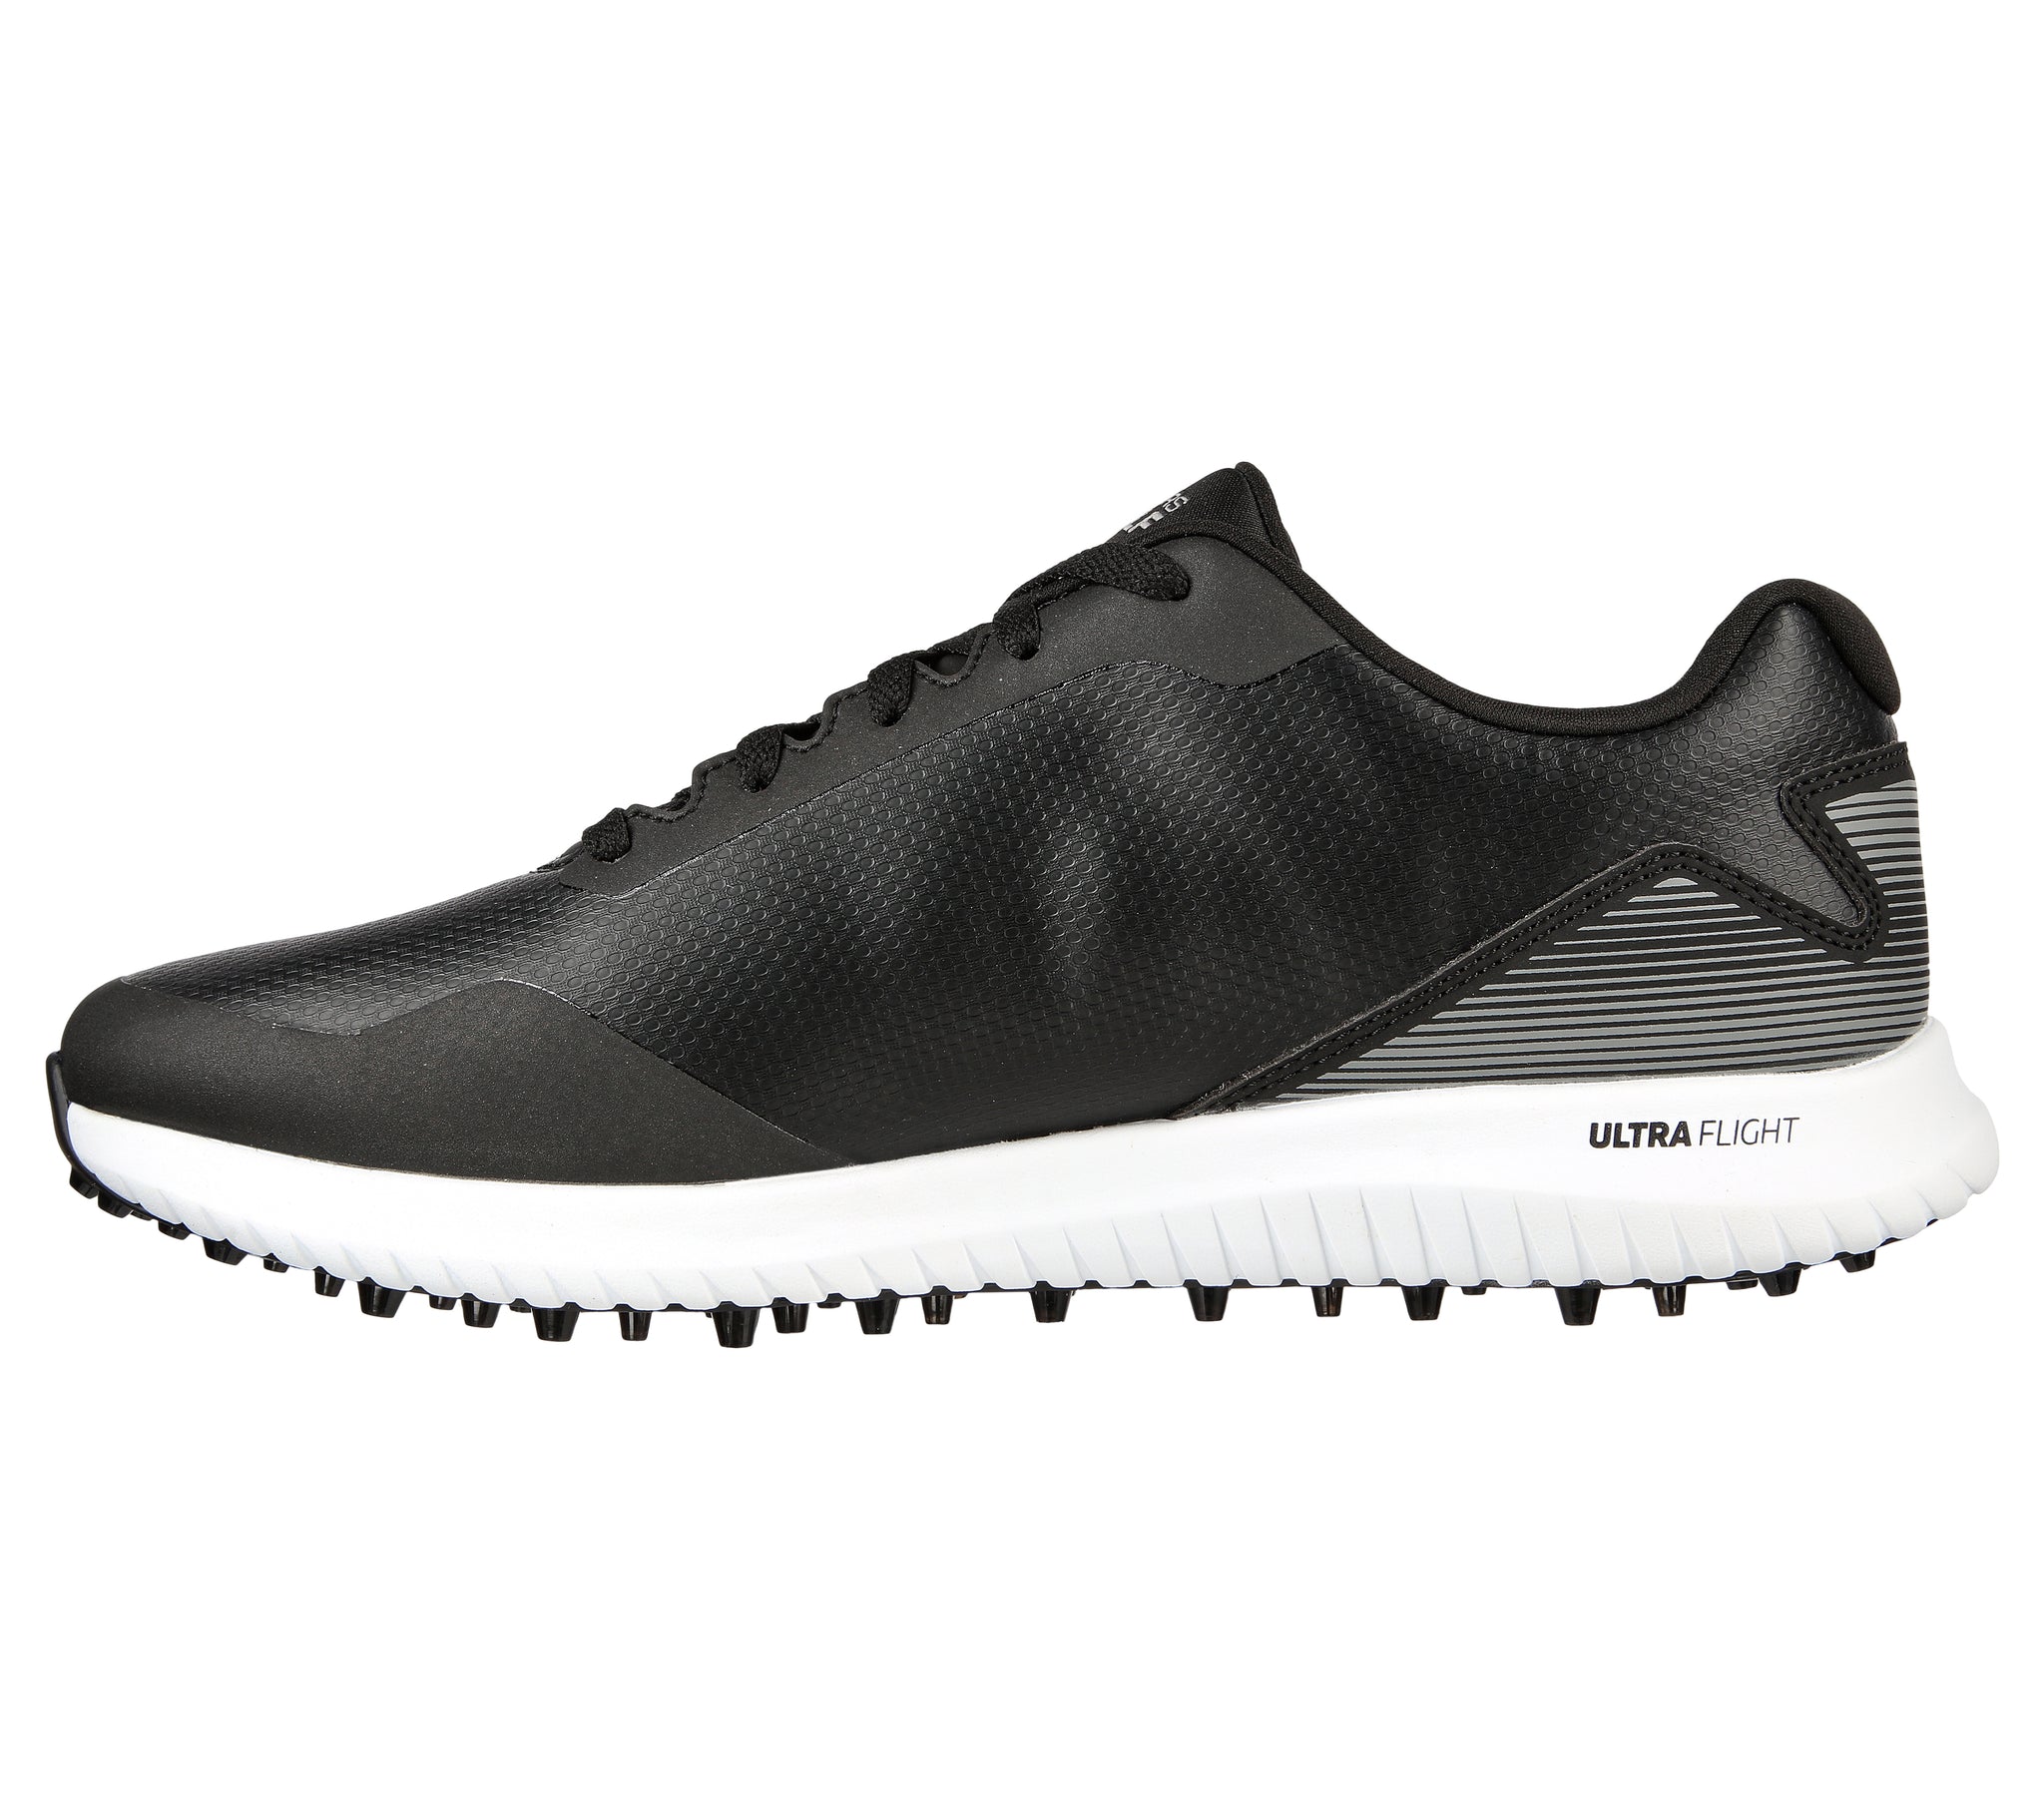 214028 NVBL - SKECHERS ARCH FIT GO GOLF MAX 2 - Shoess